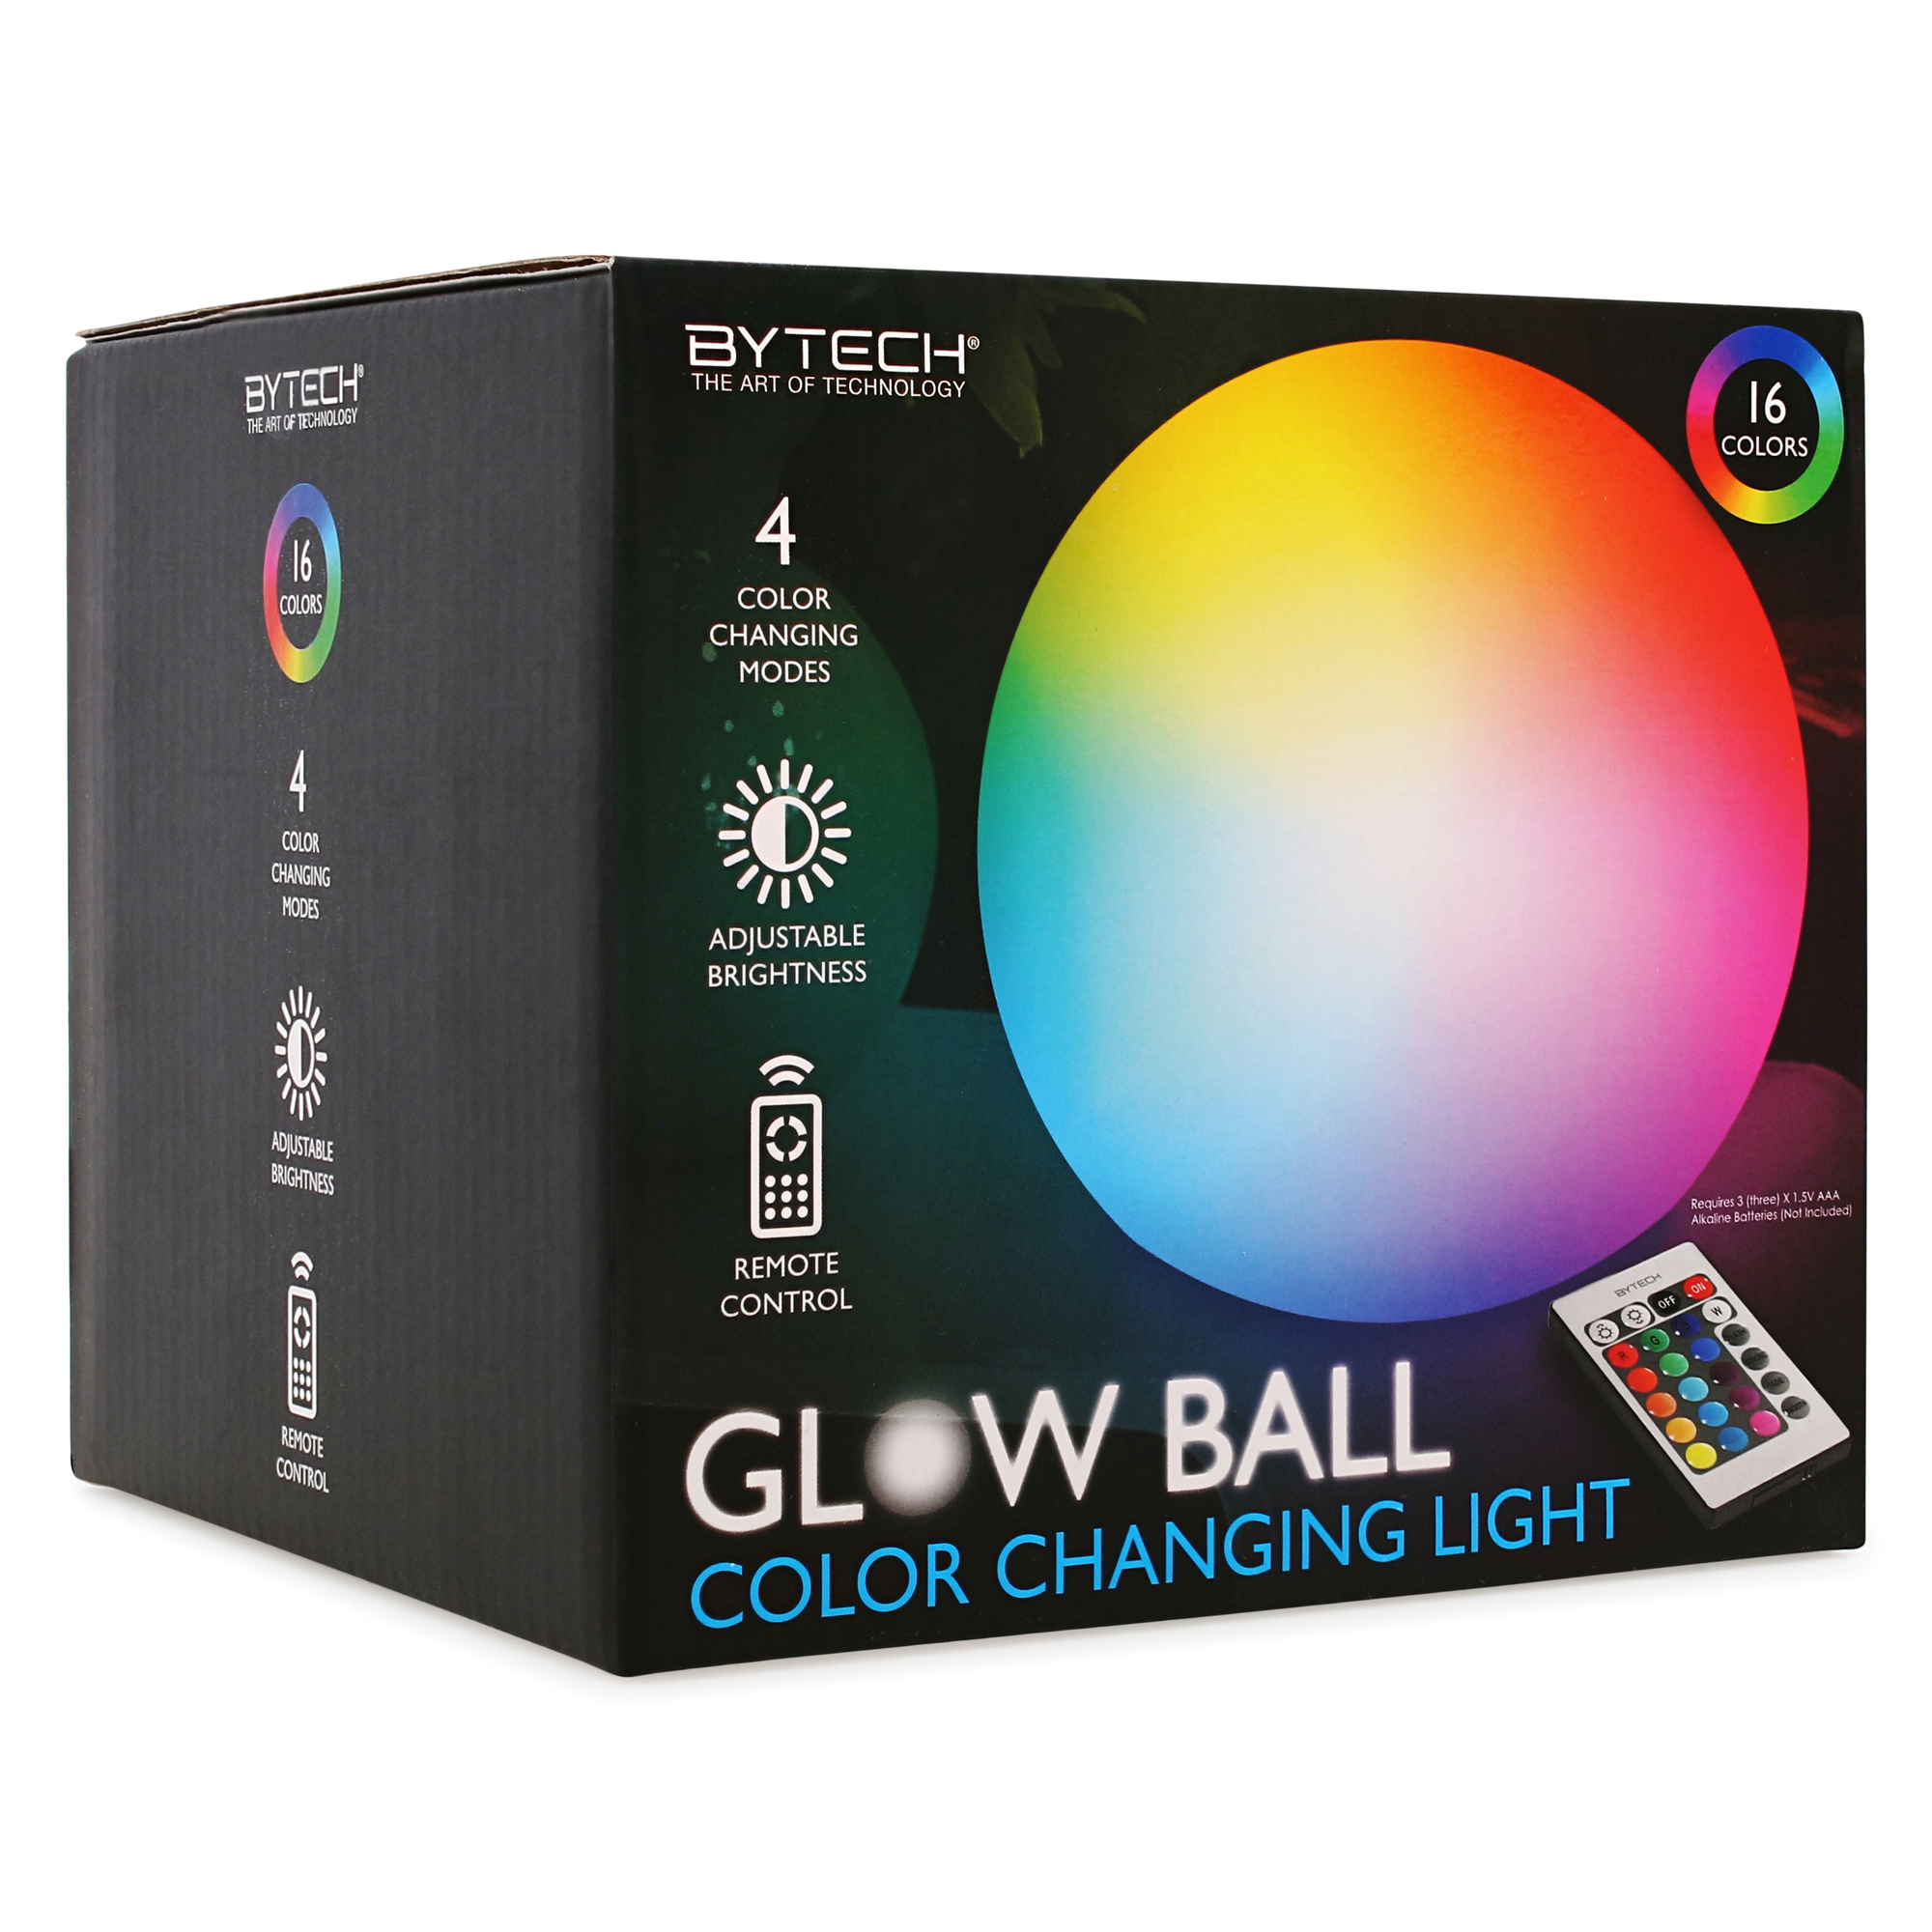 glow ball LED color change orb light with remote 6in